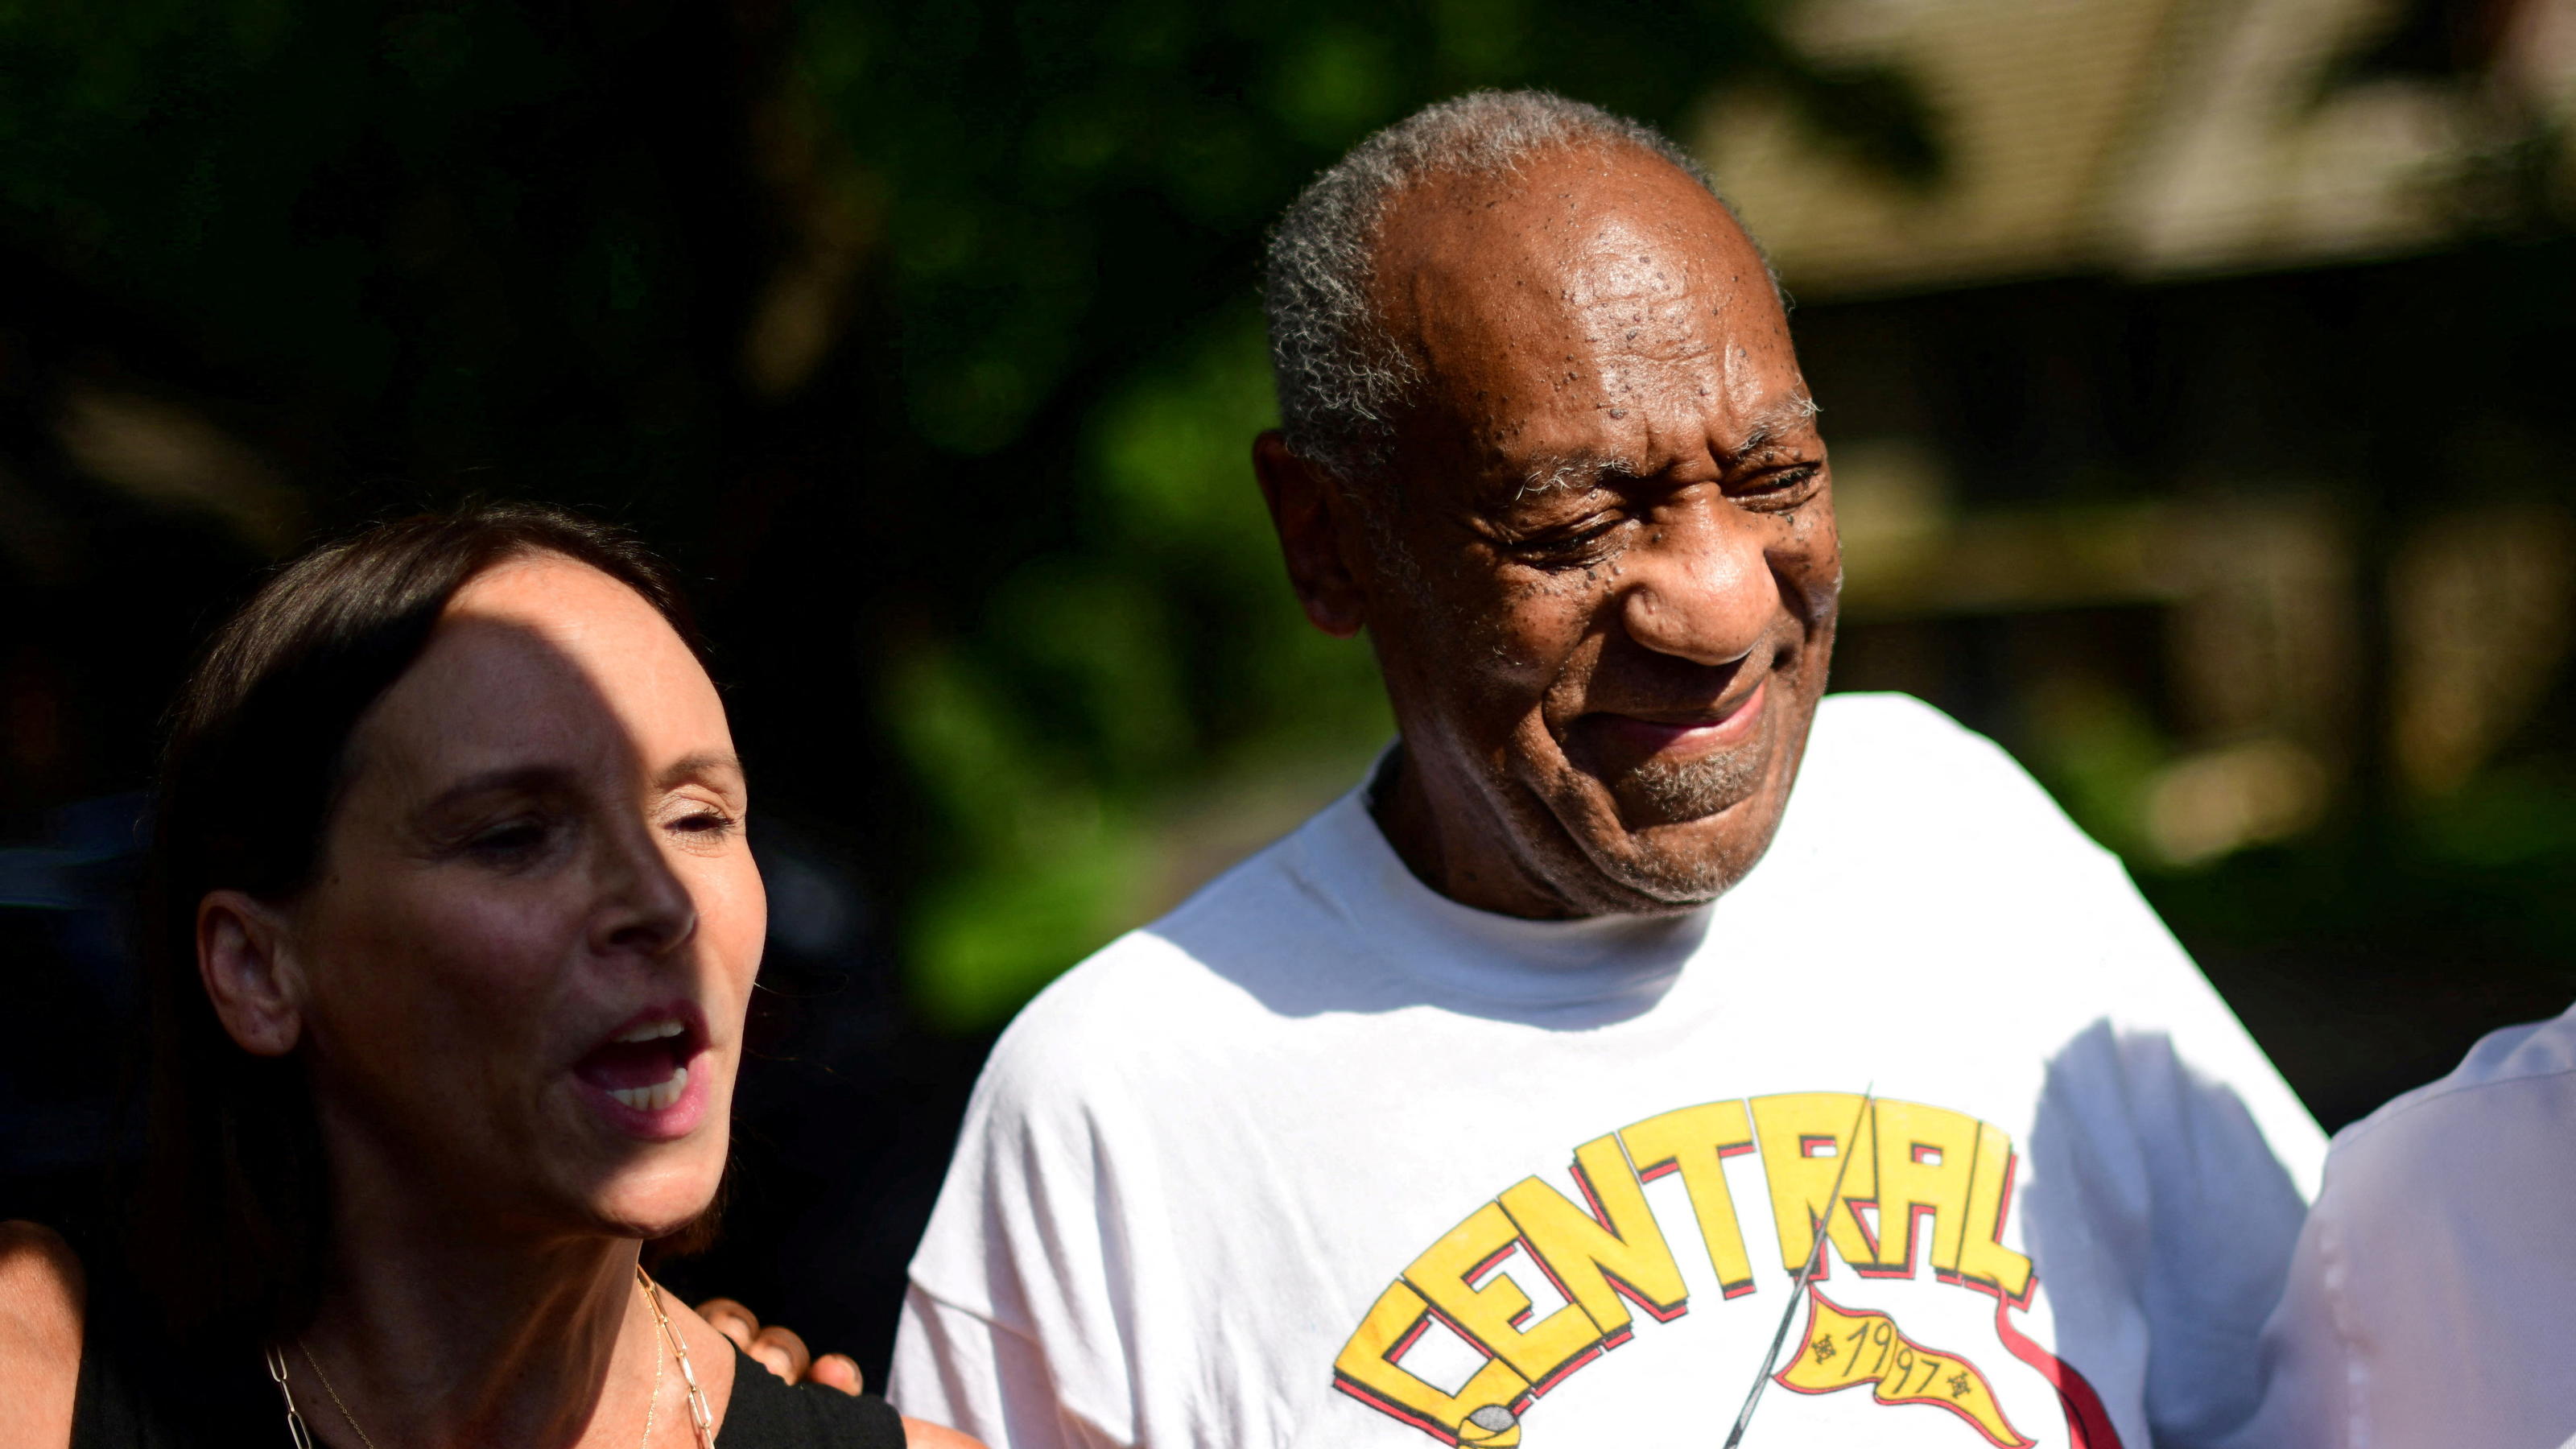 FILE PHOTO: Bill Cosby stands next to lawyer Jennifer Bonjean outside his home after Pennsylvania's highest court overturned his sexual assault conviction and ordered him released from prison immediately, in Elkins Park, Pennsylvania, U.S., June 30, 